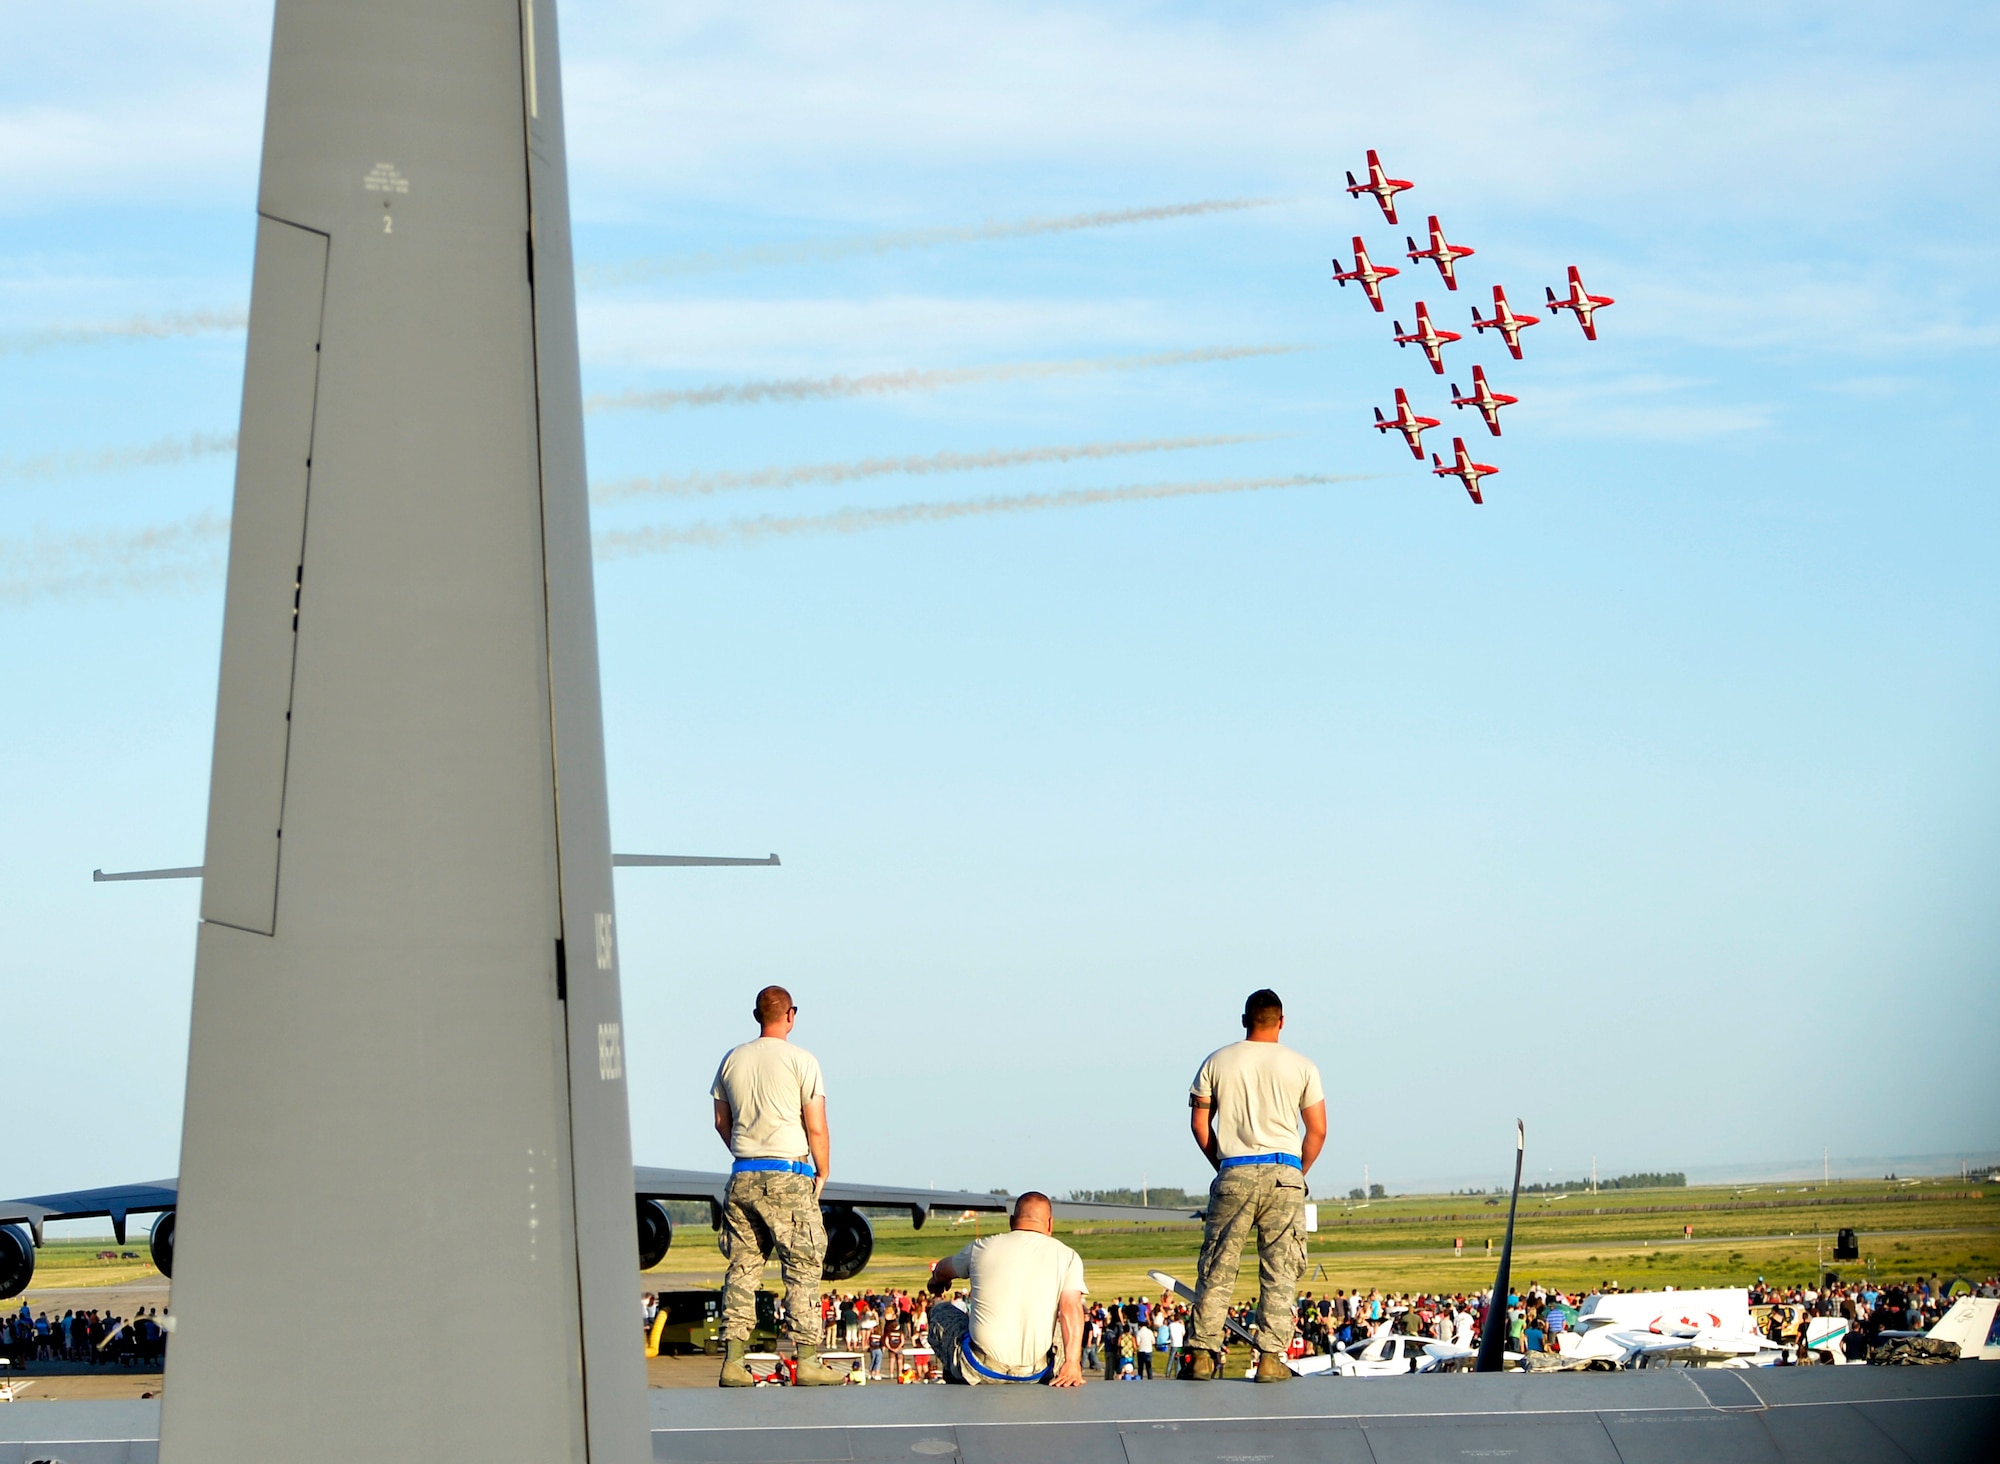 Airmen from the 415th Special Operations Squadron stand on top of a C-130 Hercules to watch the Royal Canadian Forces Snowbirds perform July 24, 2015, in Lethbridge, Alberta province, Canada. The C-130 static display and Snowbird performance were part of the 2015 Lethbridge International Airshow.  (U.S. Air Force photo by Airman 1st Class Christian Clausen/Released)